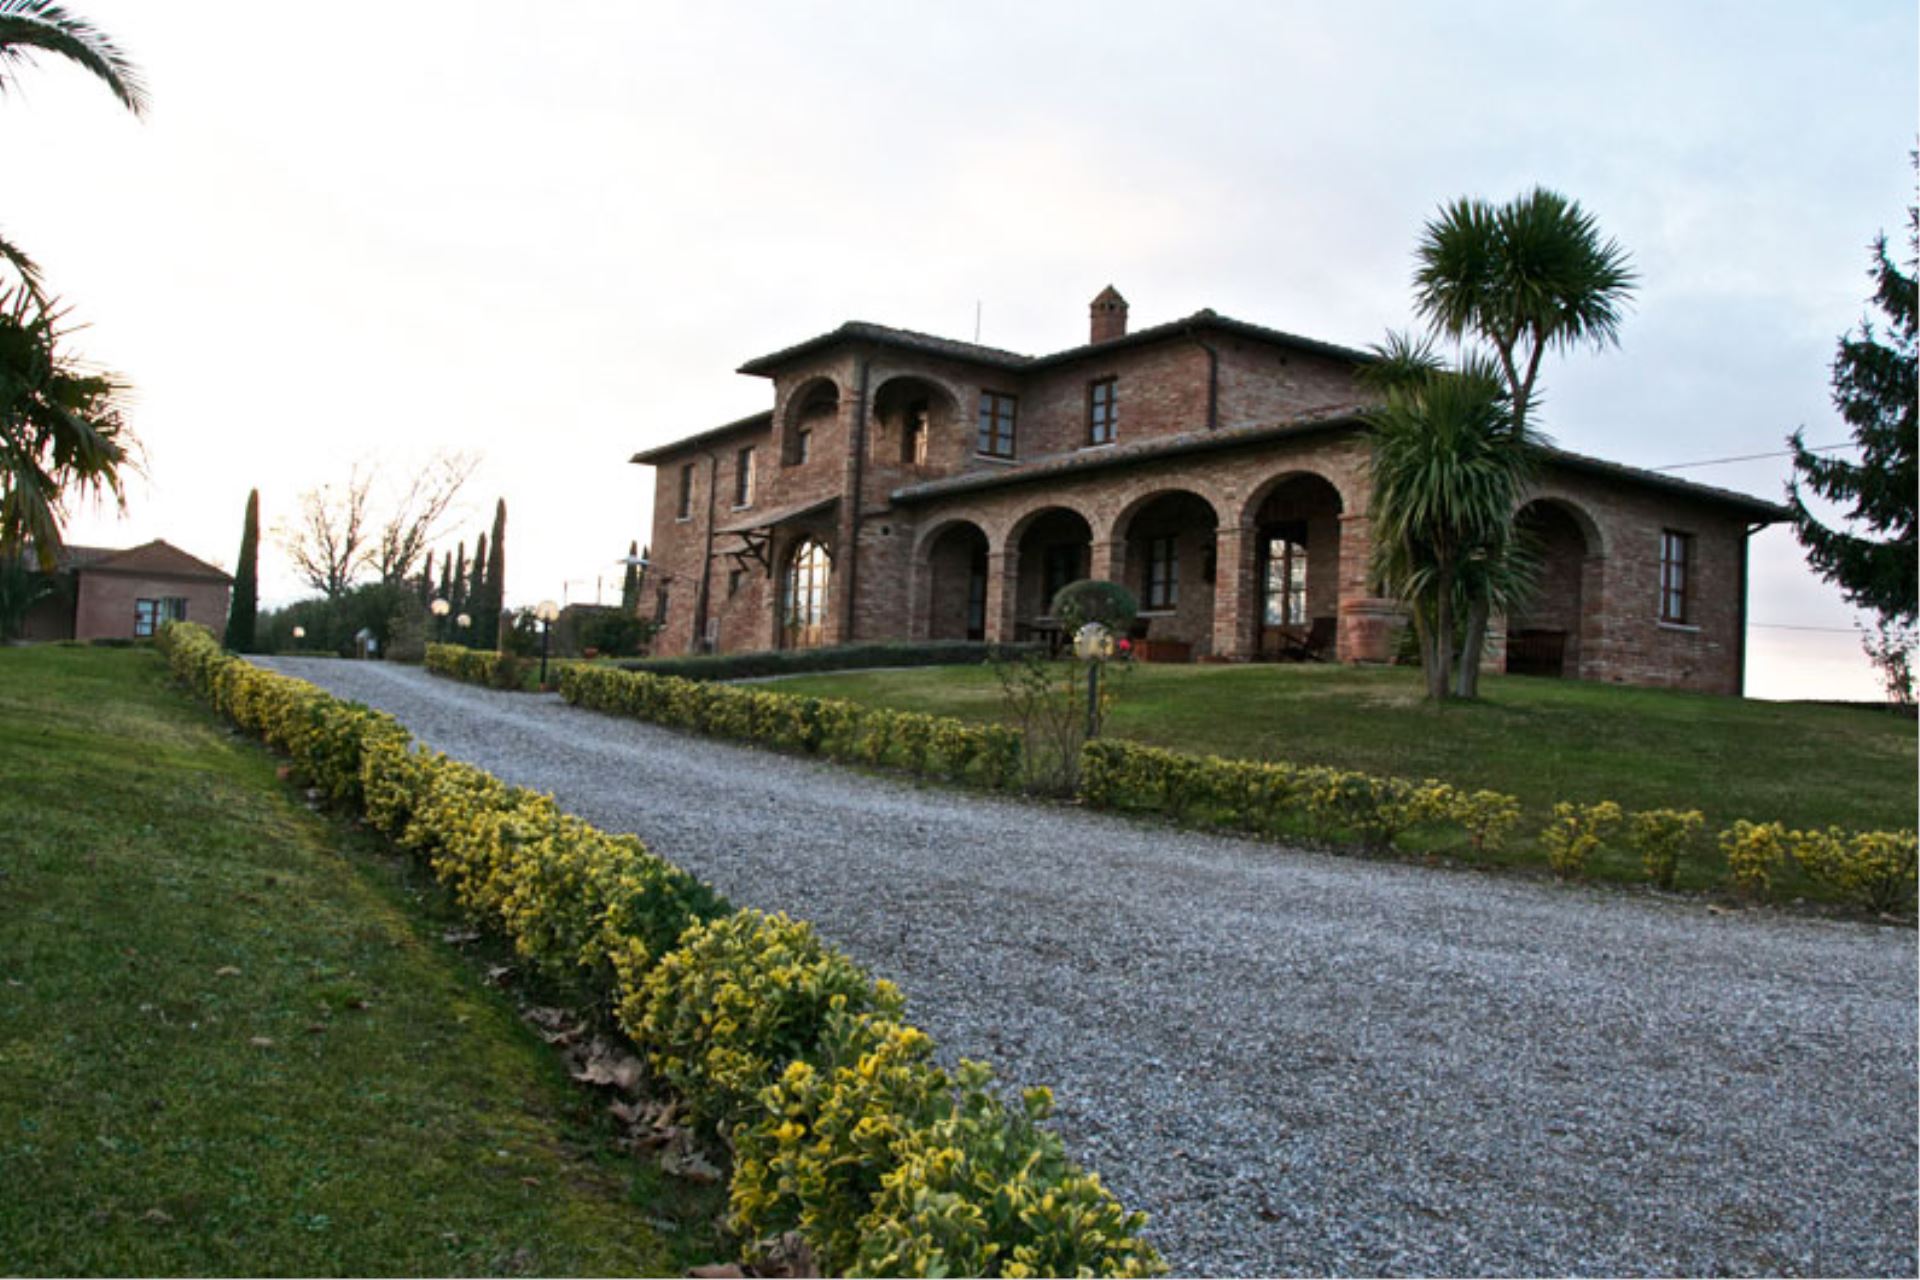 APARTMENTS WITH POOL GIRASOLE MONTEPULCIANO TOSCANA